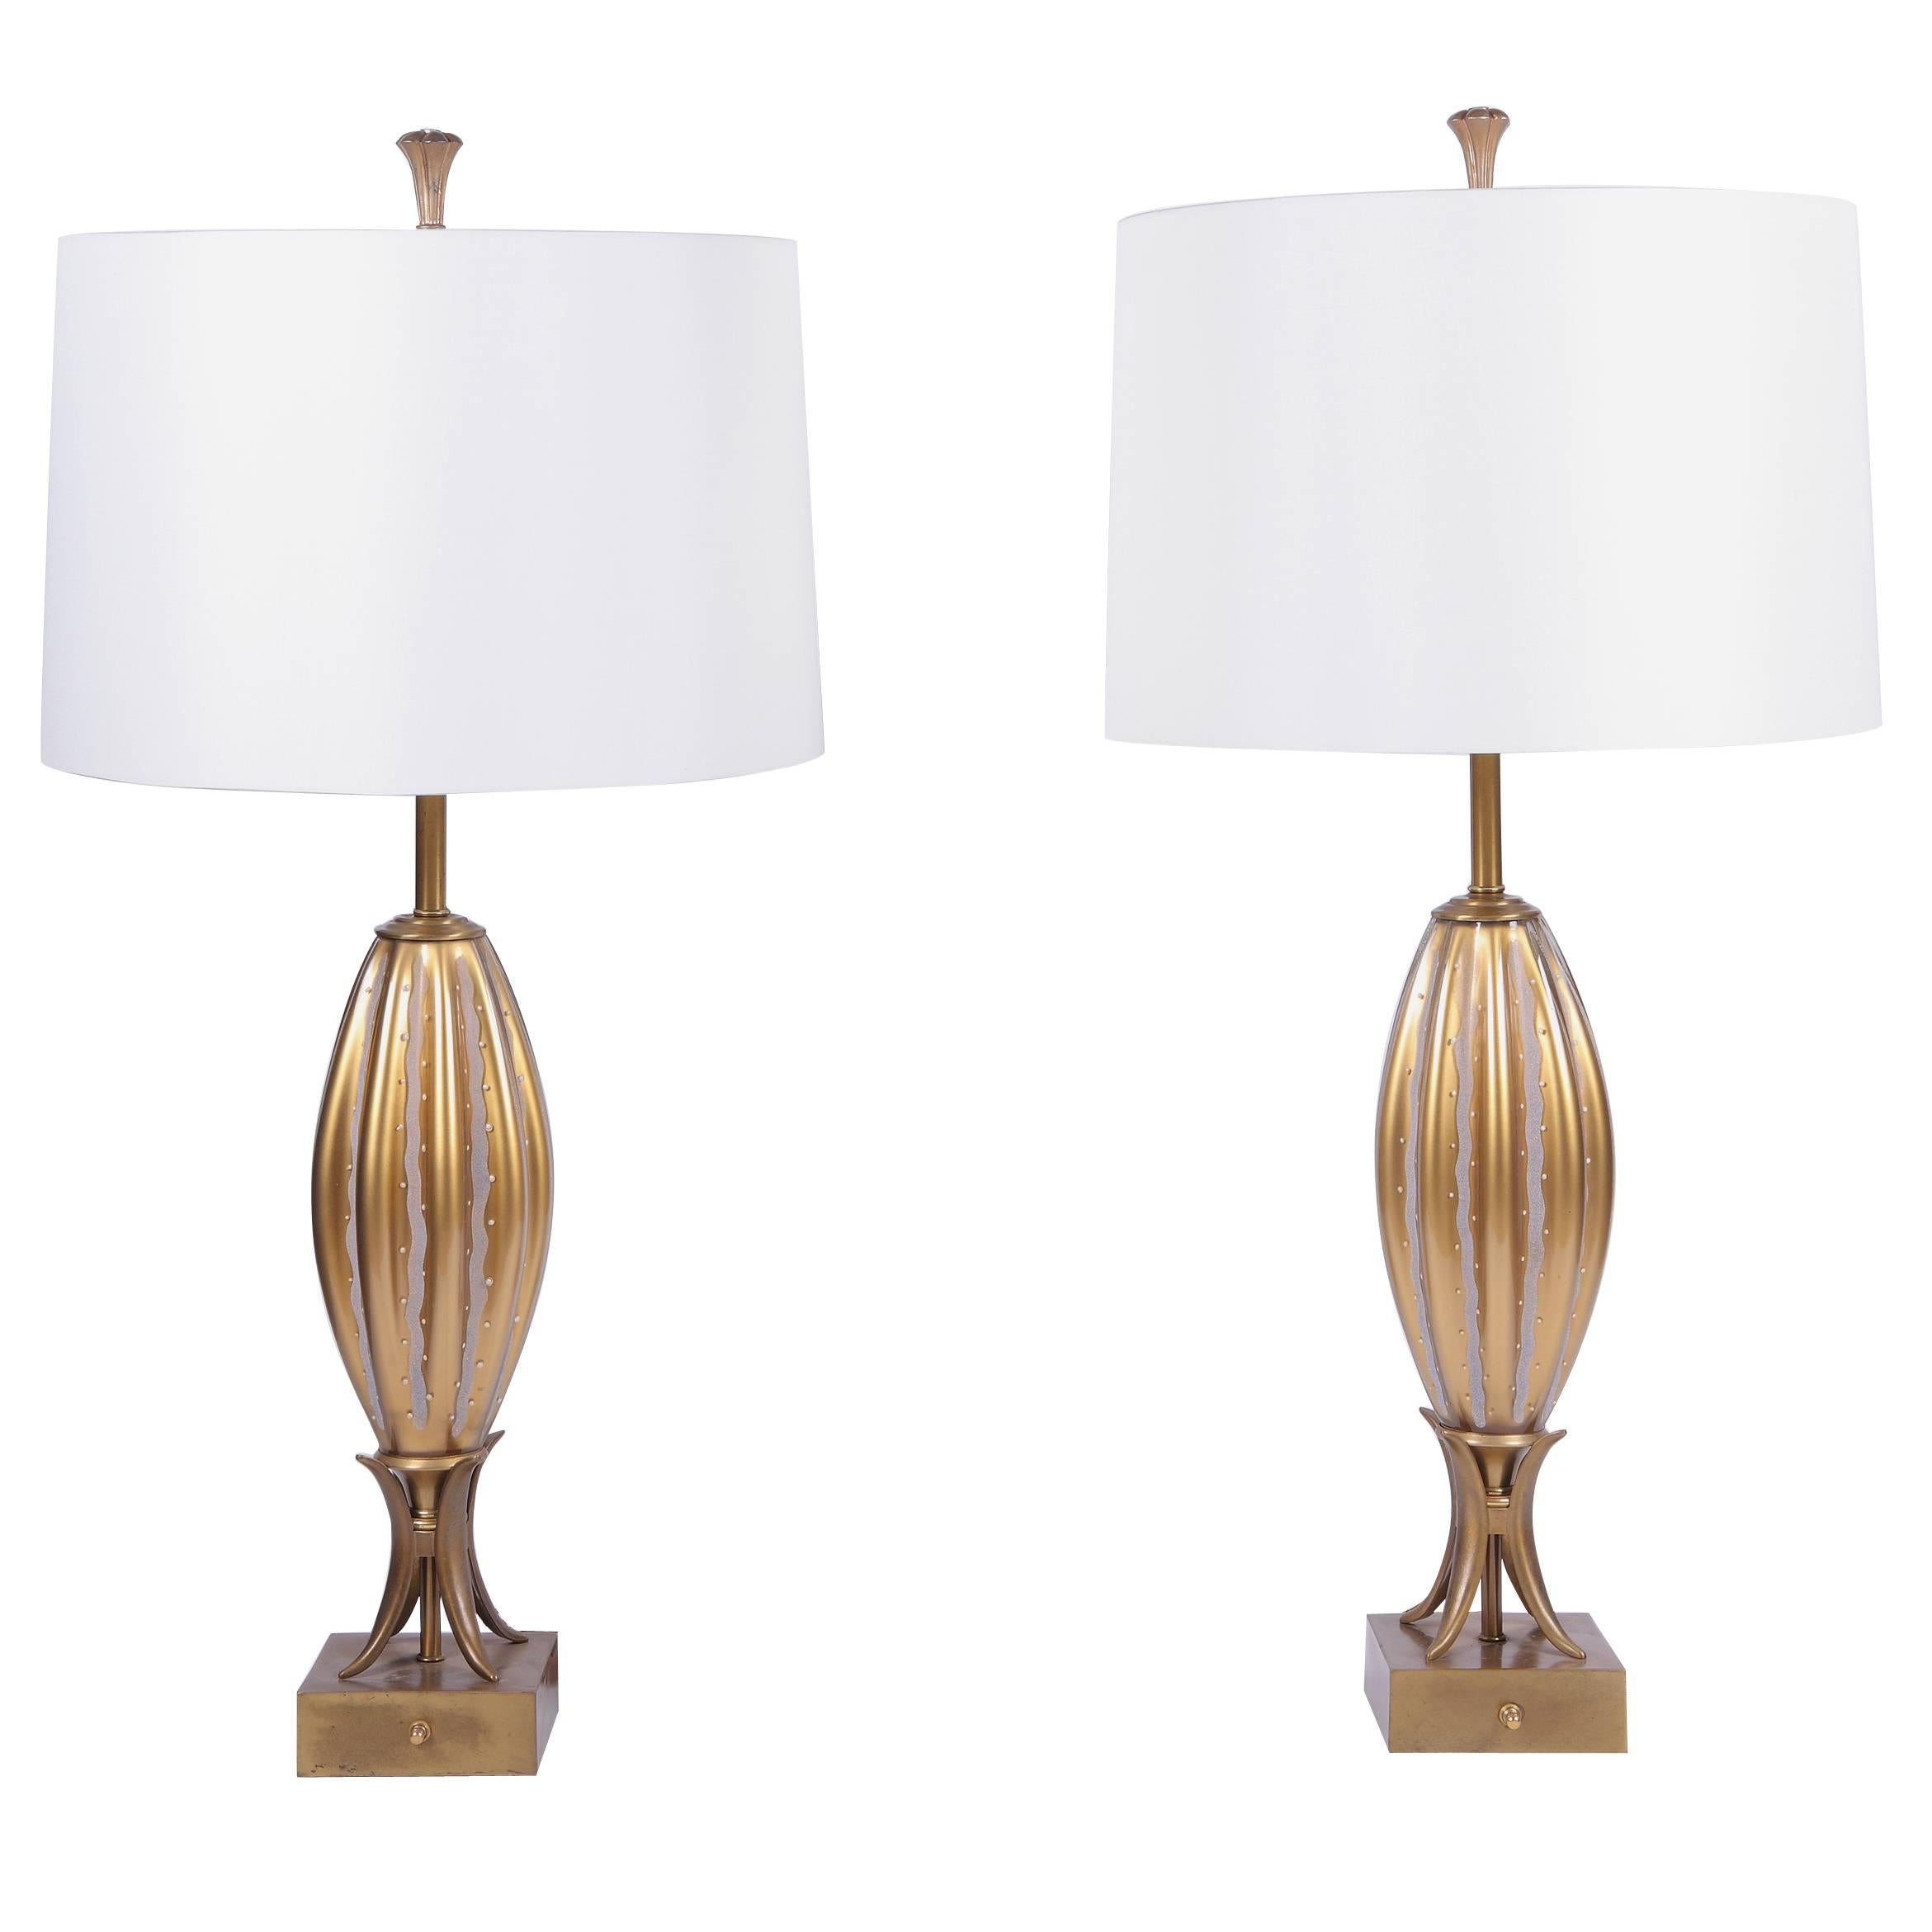 Pair of Mid-Century Modern Murano Glass Lamps Reverse Painted in Antique Gold